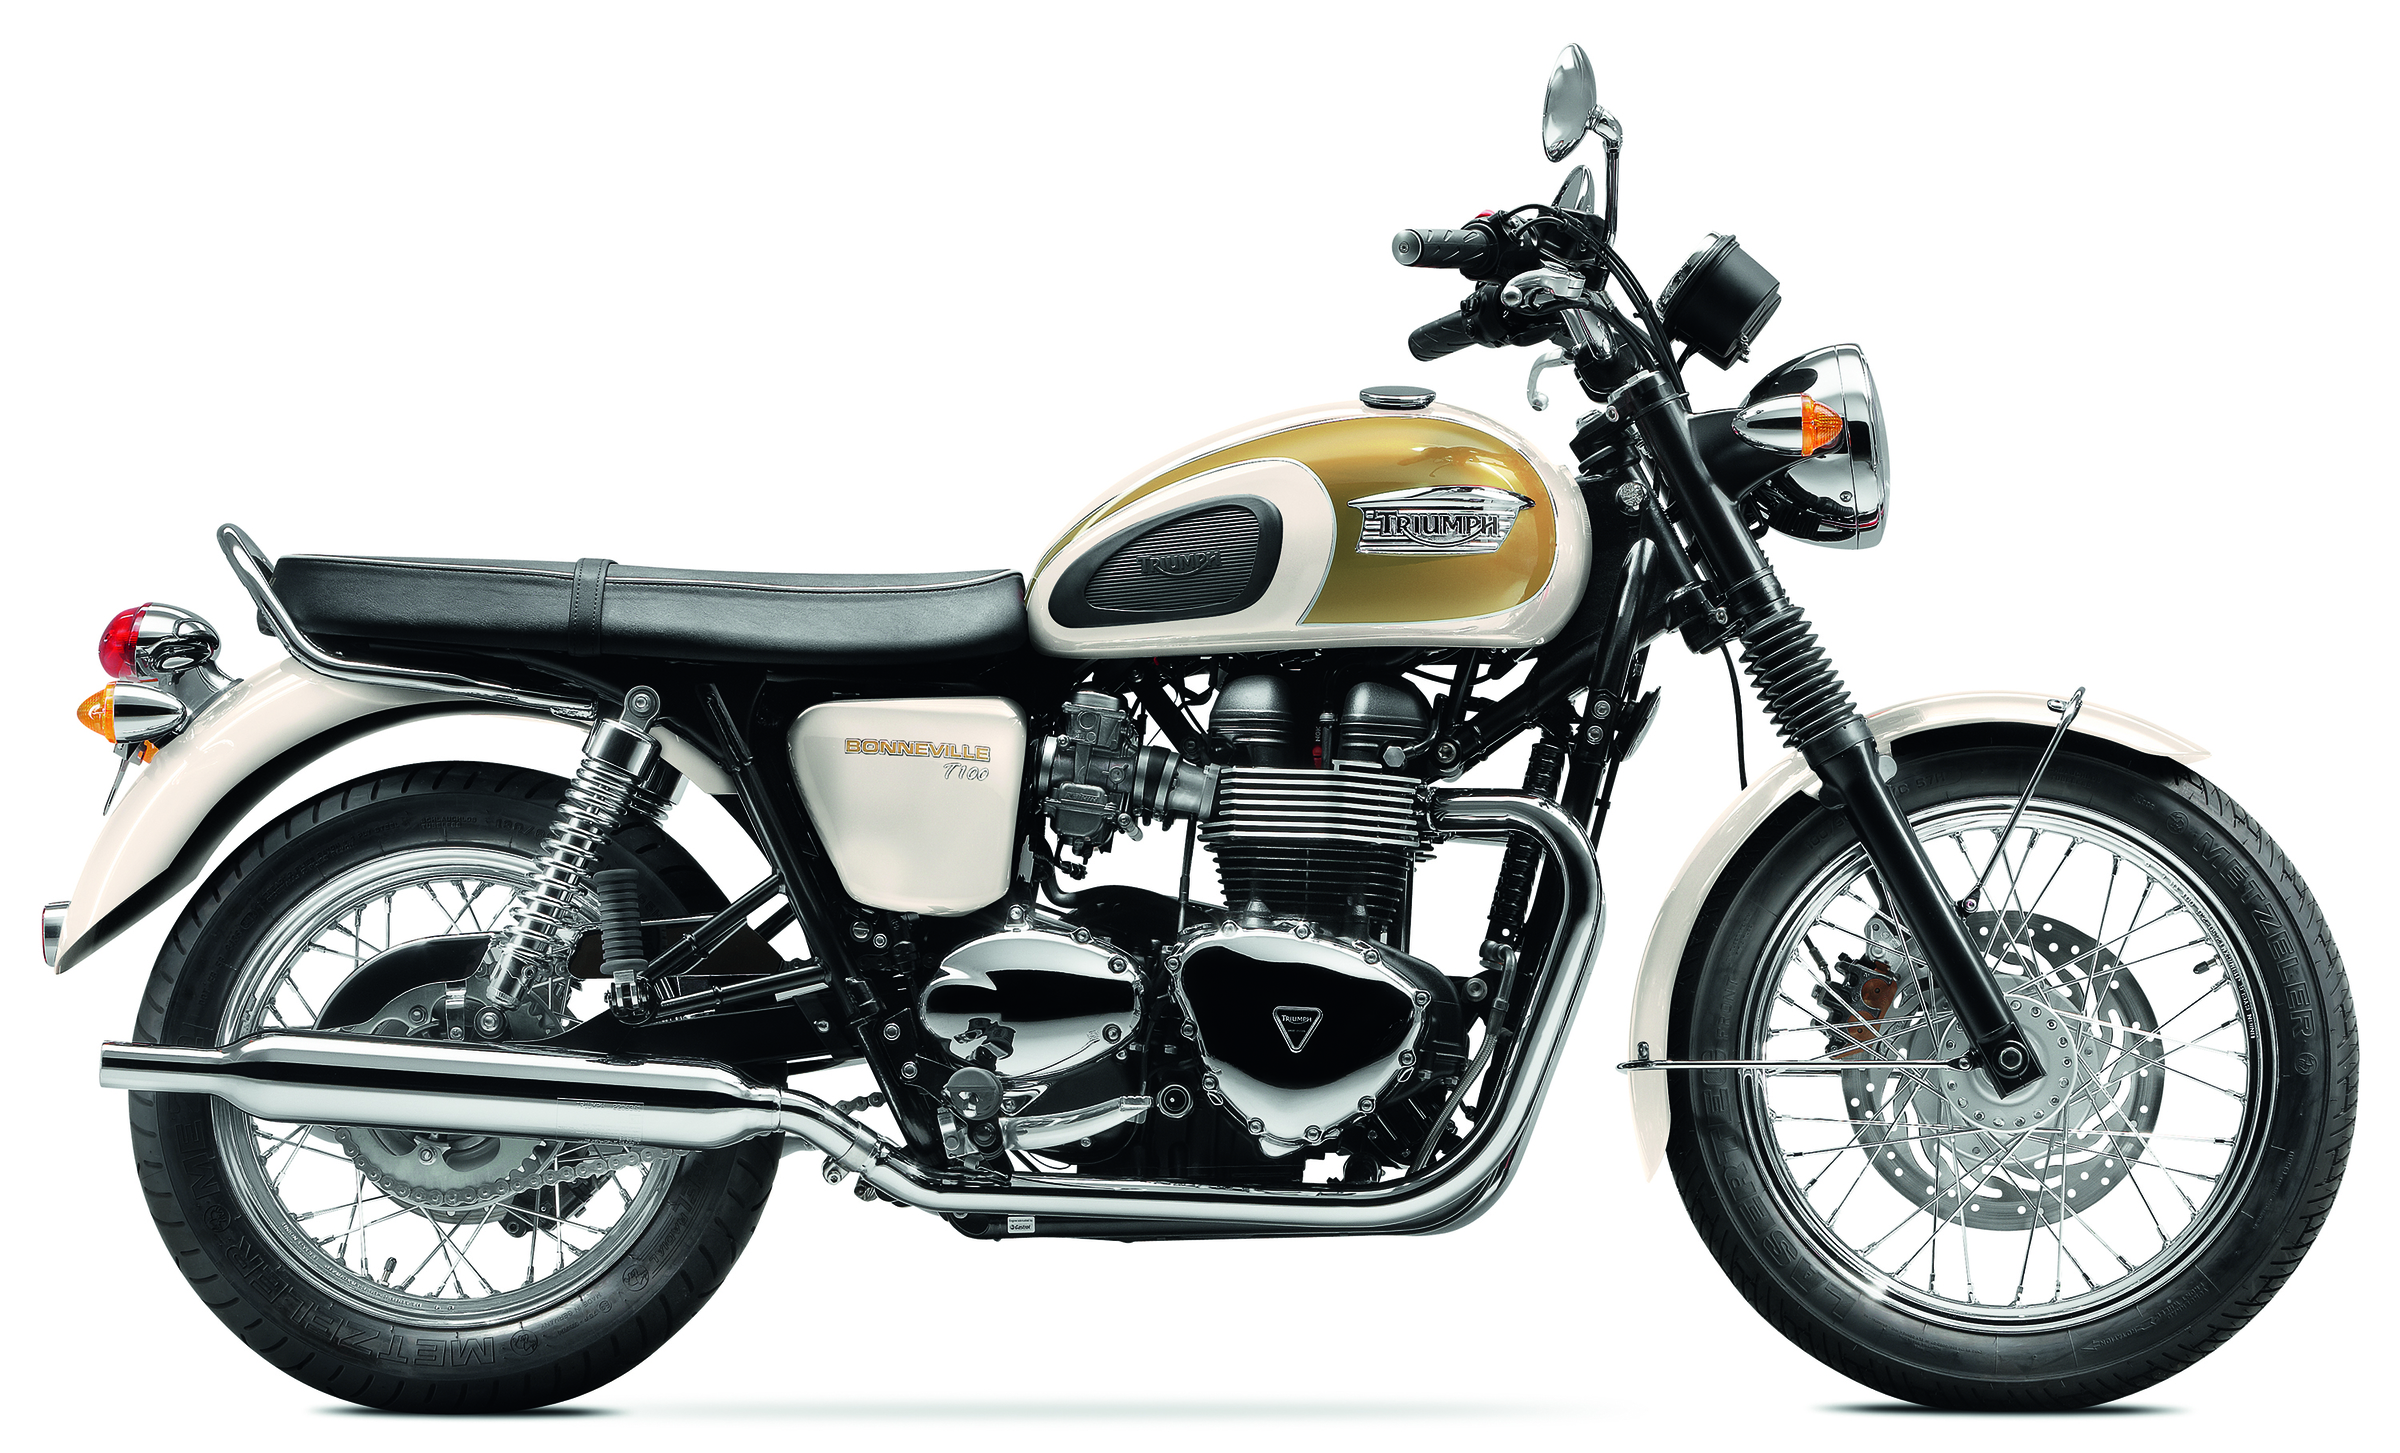 In addition to the new gold and white paint, the ‘14 Bonneville T100 ...